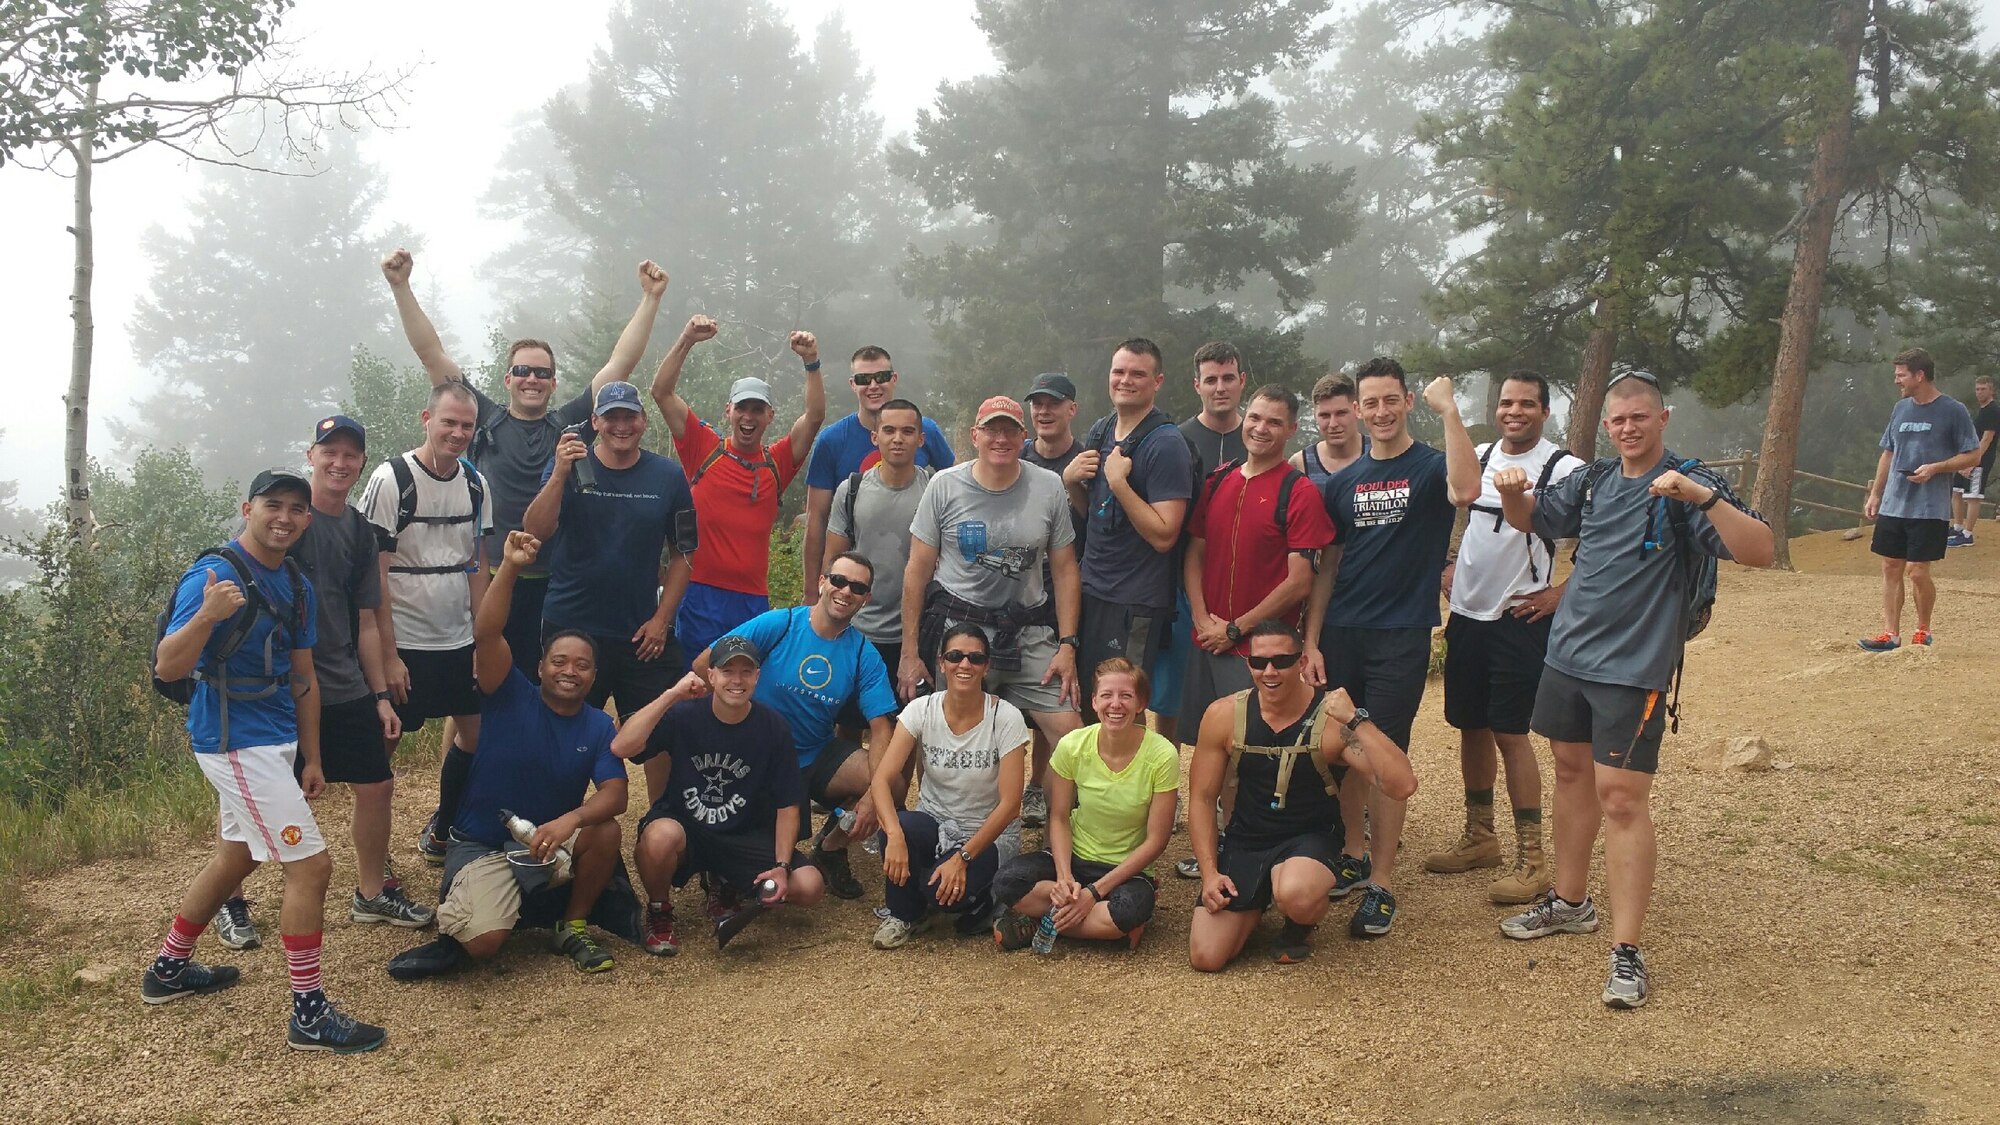 Citizen Airmen of the 960th Network Operations Squadron at Peterson Air Force Base, Colo., pose for a victory shot at the peak of Manitou Incline, a former railroad up the side of a mountain, in Colorado Springs. The railroad tracks have been removed, but the railroad ties remain and serve as the steps up the Incline, which number more than those of Empire State Building. The incline is just under one mile long, but climbs 2,000 vertical feet with an average steepness of 45 percent with some sections as steep as 68 percent. Climbers start at a base of 6,500 feet and end up at the peak at 8,590 feet. The Manitou Incline is considered one of the highest sets of stairs in the world. The outing was a morale and physical training event during the August unit training assembly.  (U.S. Air Force courtesy photo)
